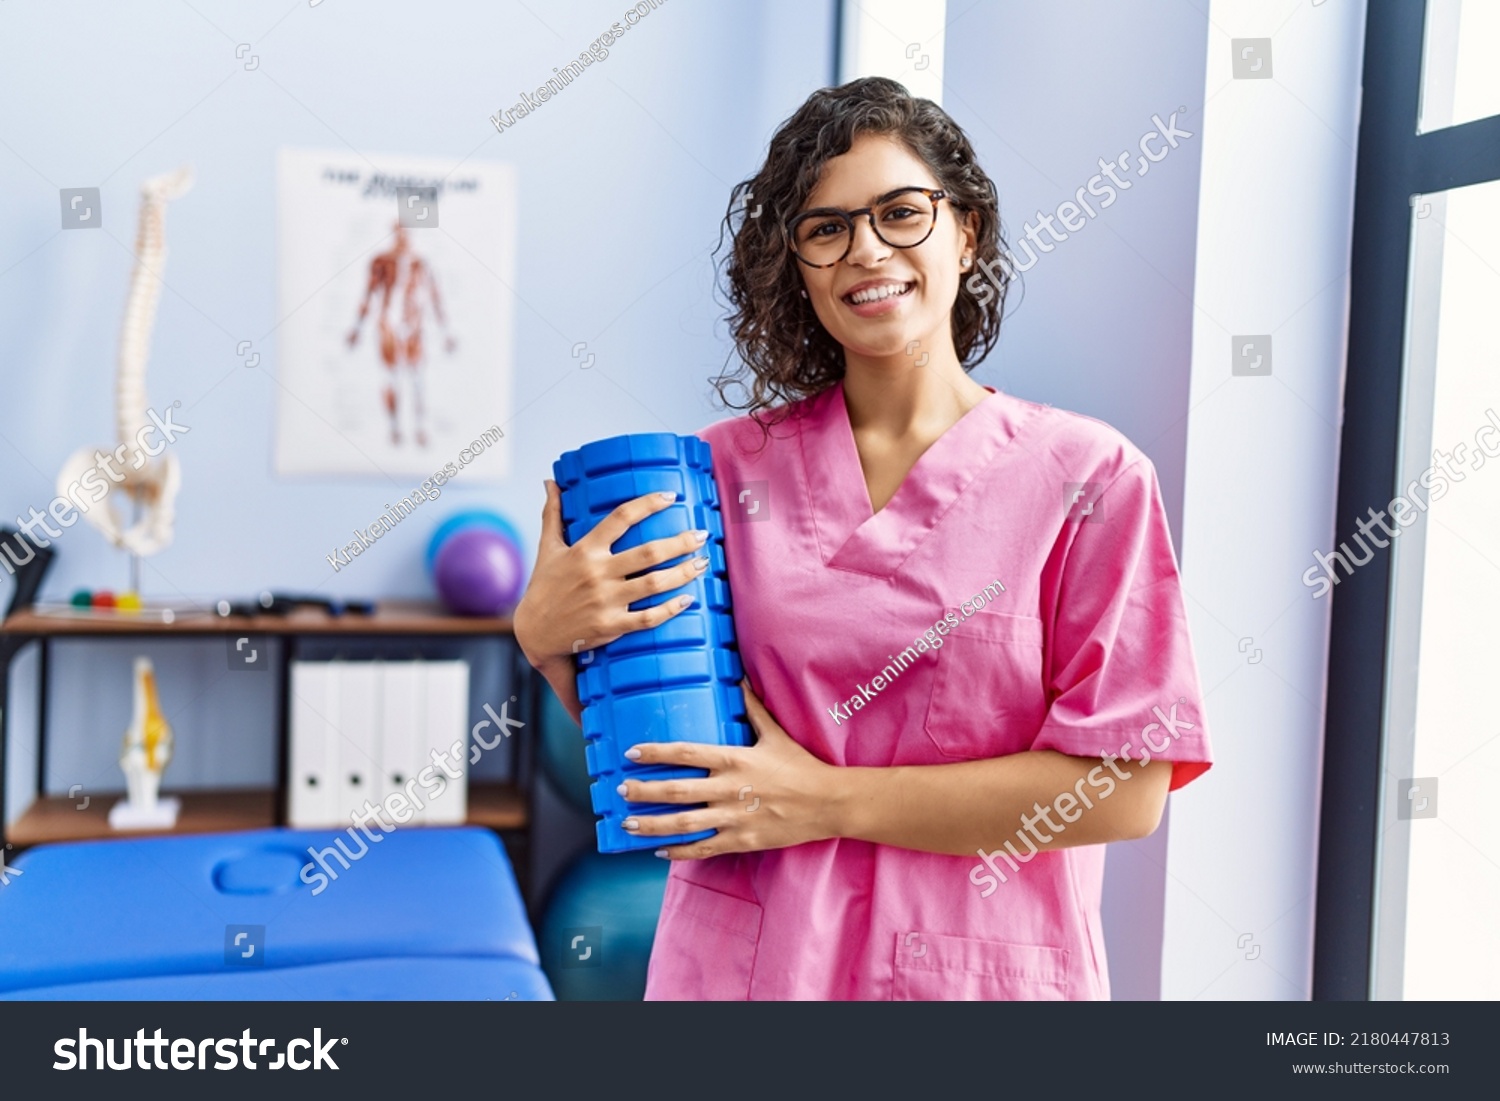 Young latin woman wearing physiotherapist uniform holding foam roller at clinic #2180447813